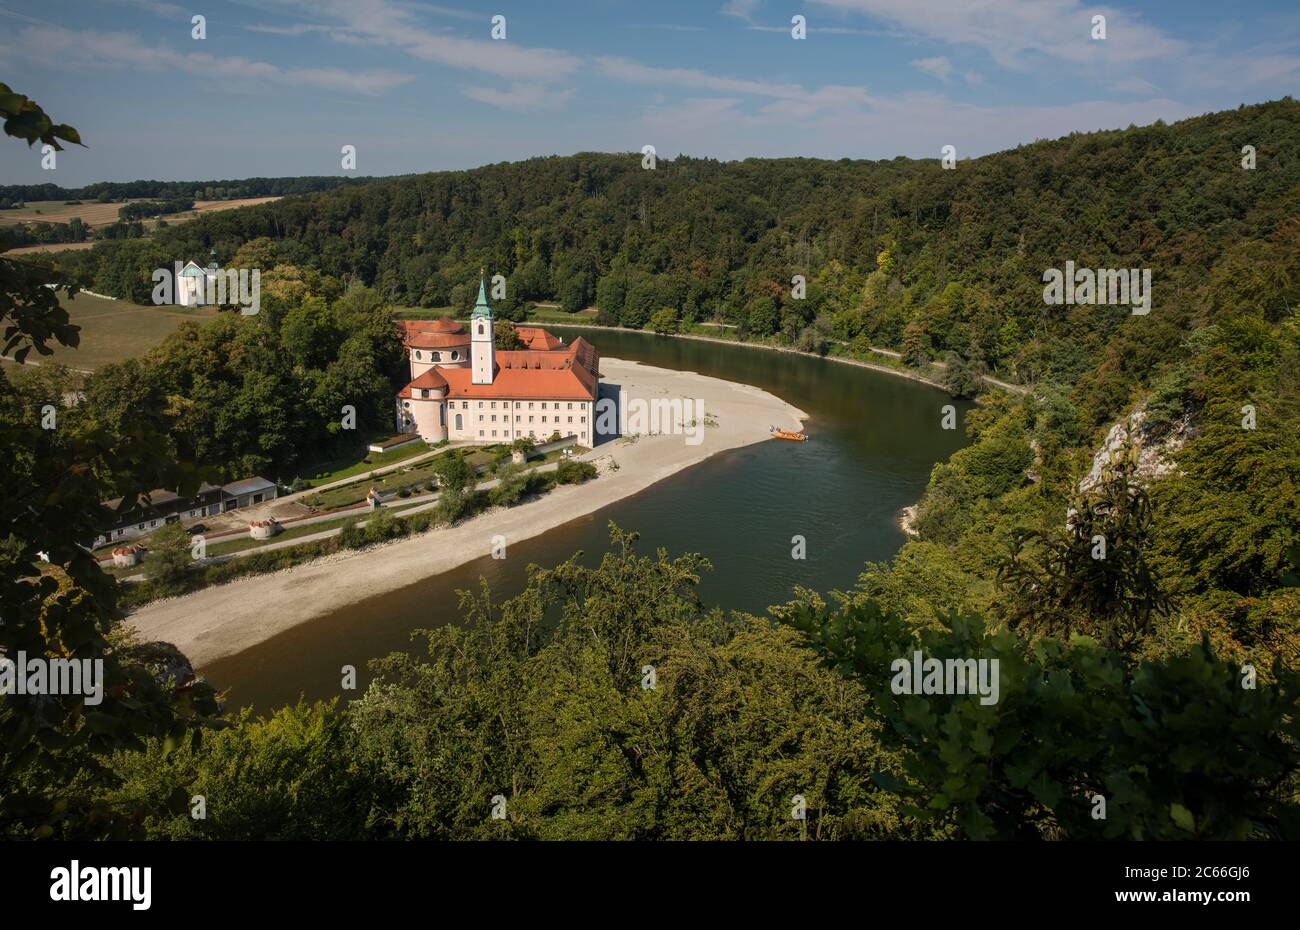 Weltenburg Abbey on the Danube River, from above Stock Photo